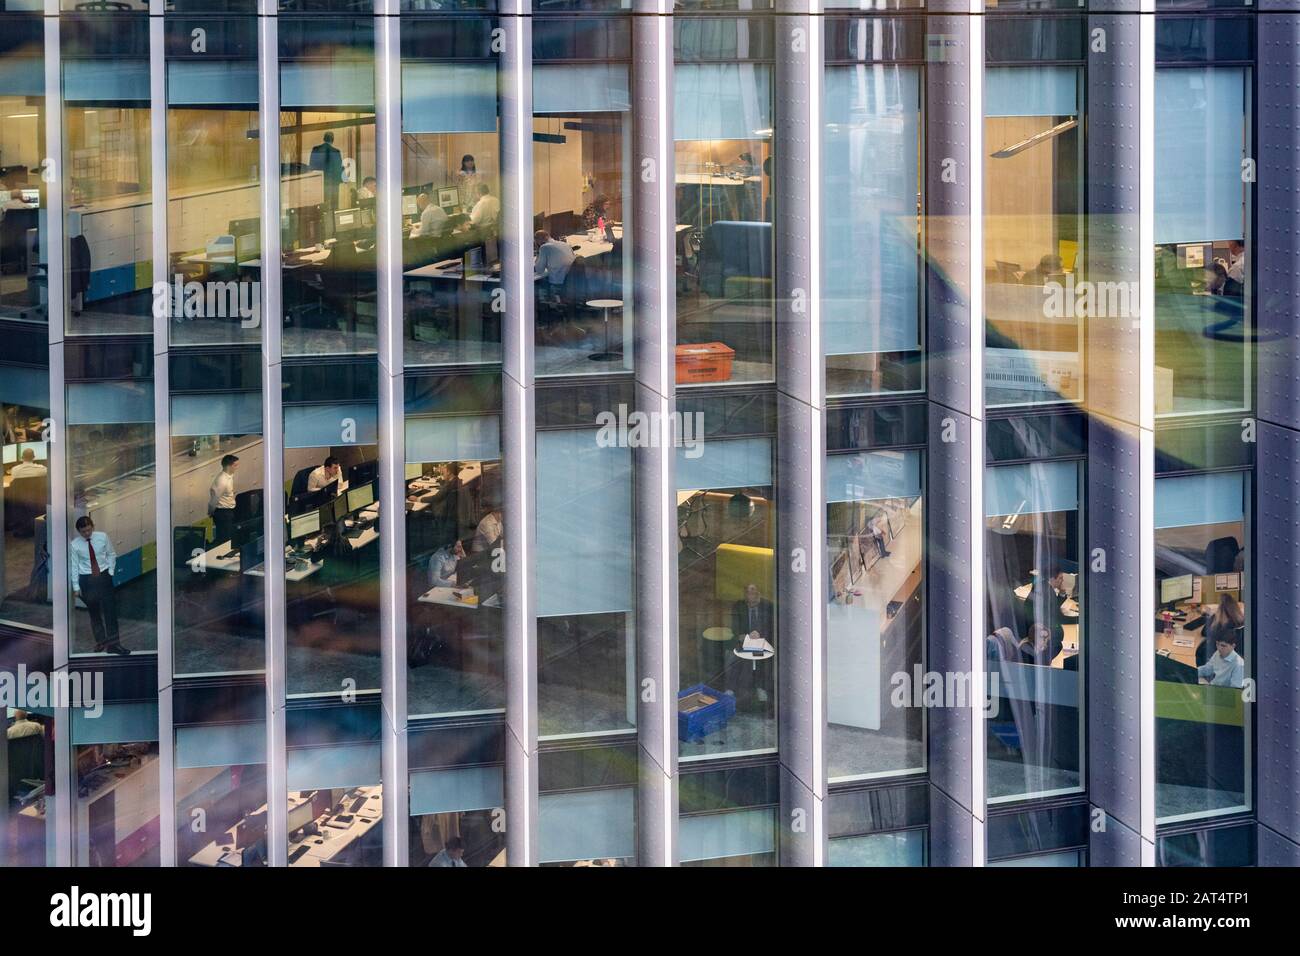 LONDON: Office workers in the City of London Photo: © 2020 David Levenson/Alamy Stock Photo